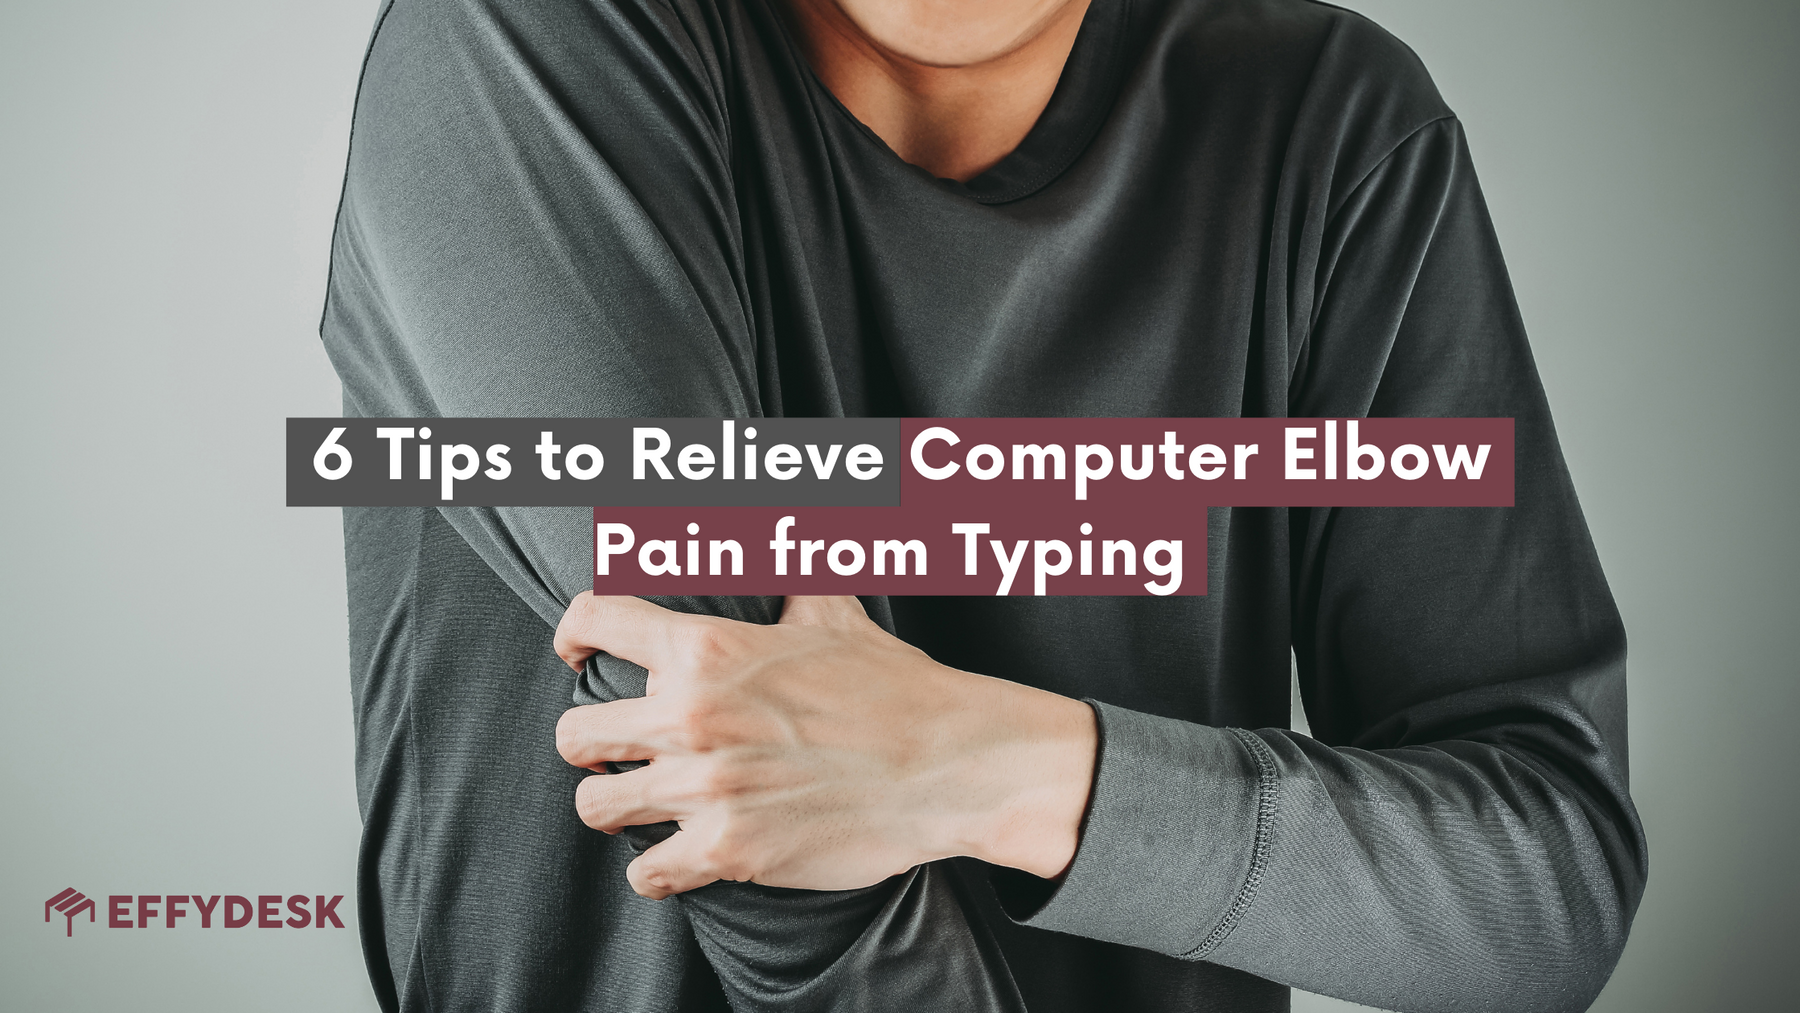 learn more about the tips of how to relieve computer elbow pain from typing